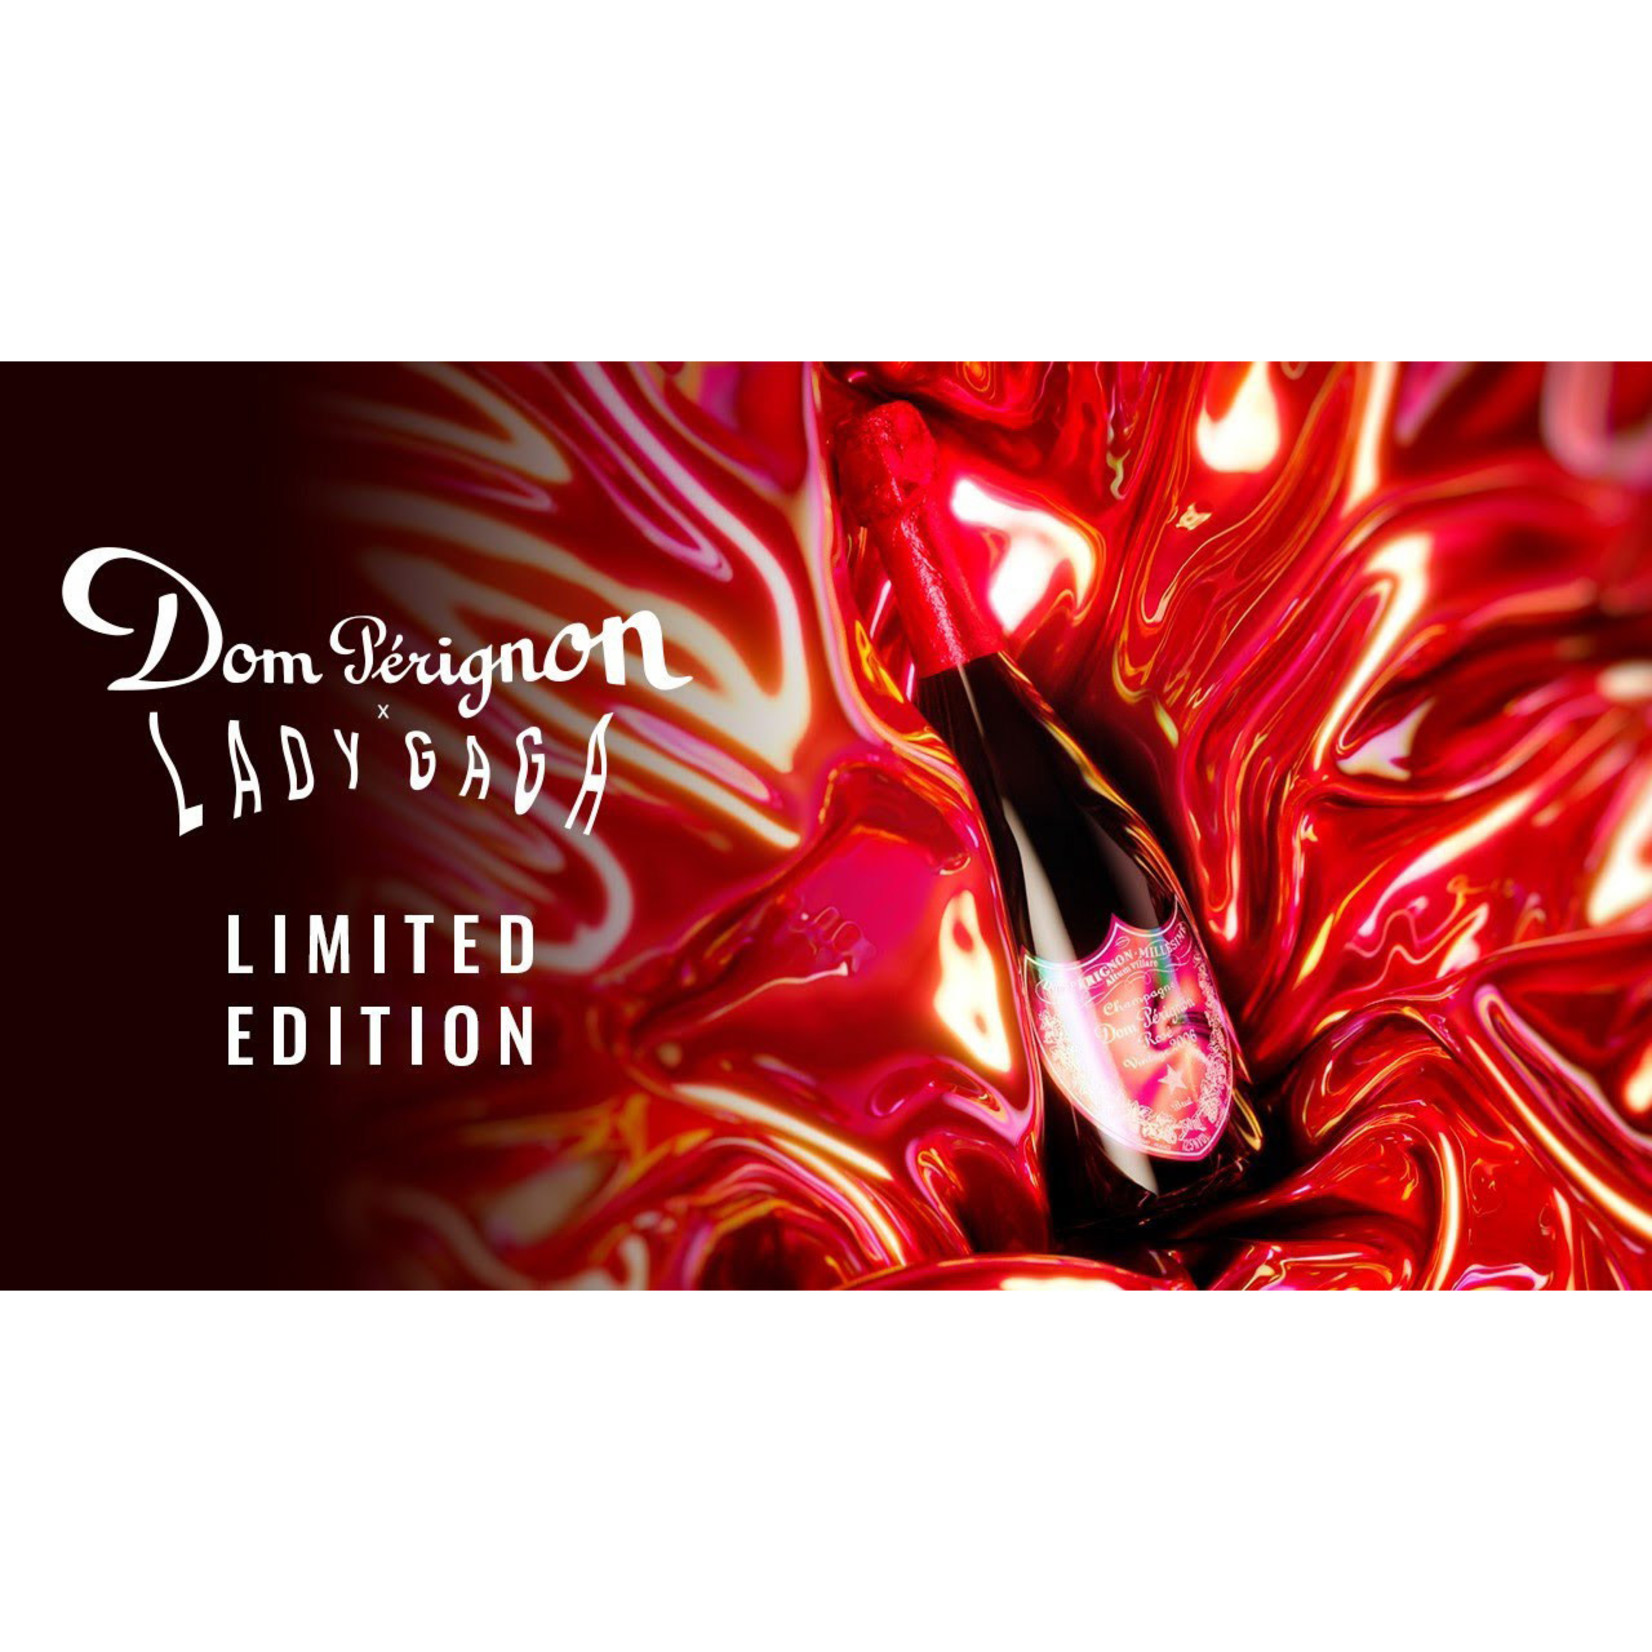 Dom Perignon Rose Champagne Lady Gaga Limited Edition 2006 - Royal Wine  Merchants - Happy to Offer!